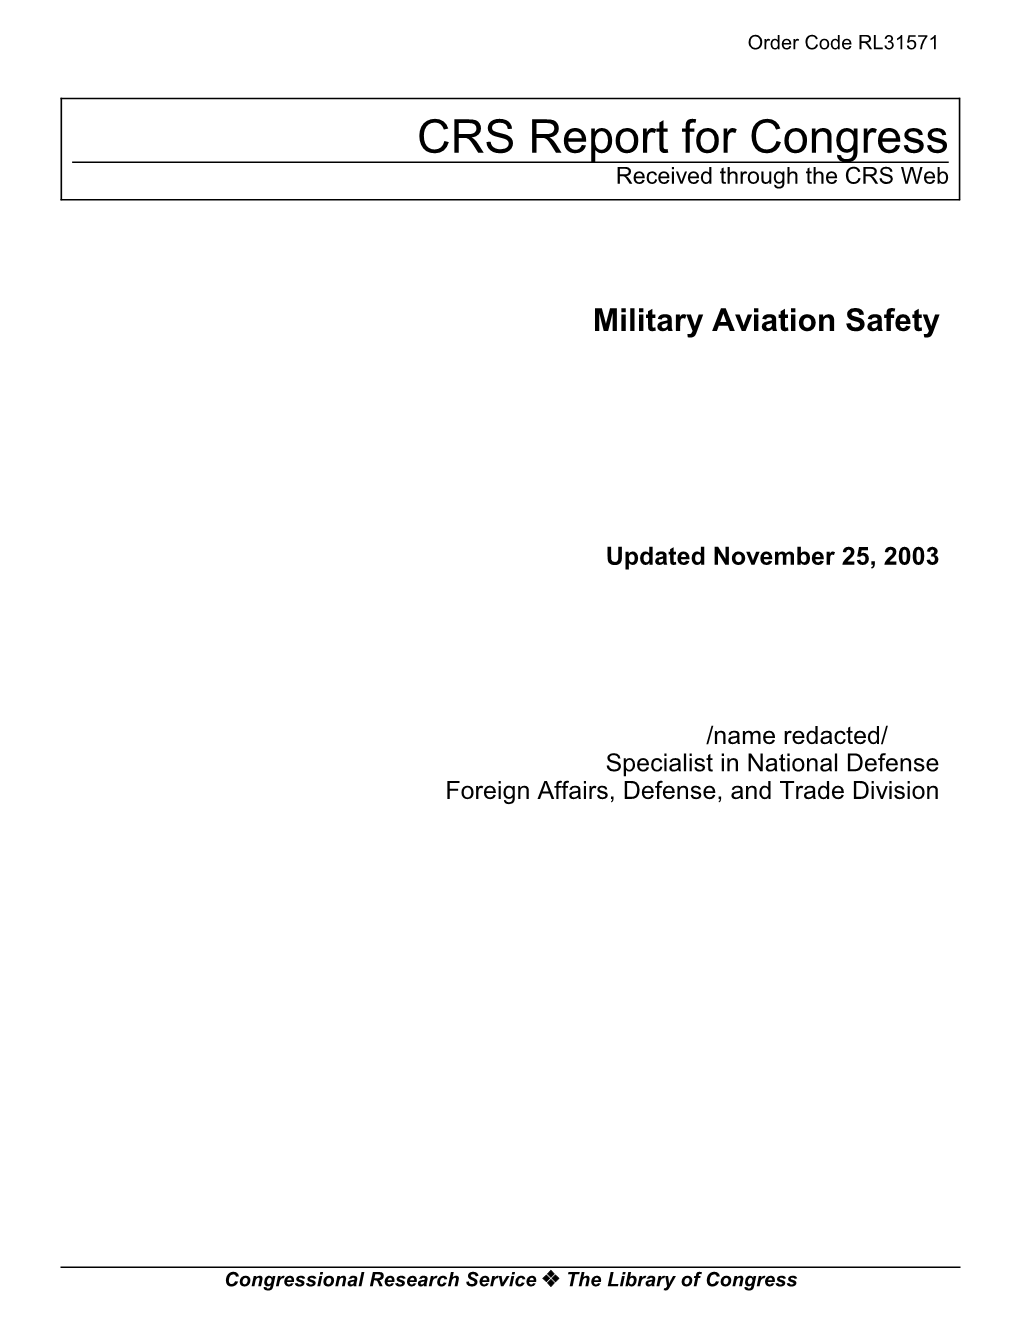 Military Aviation Safety